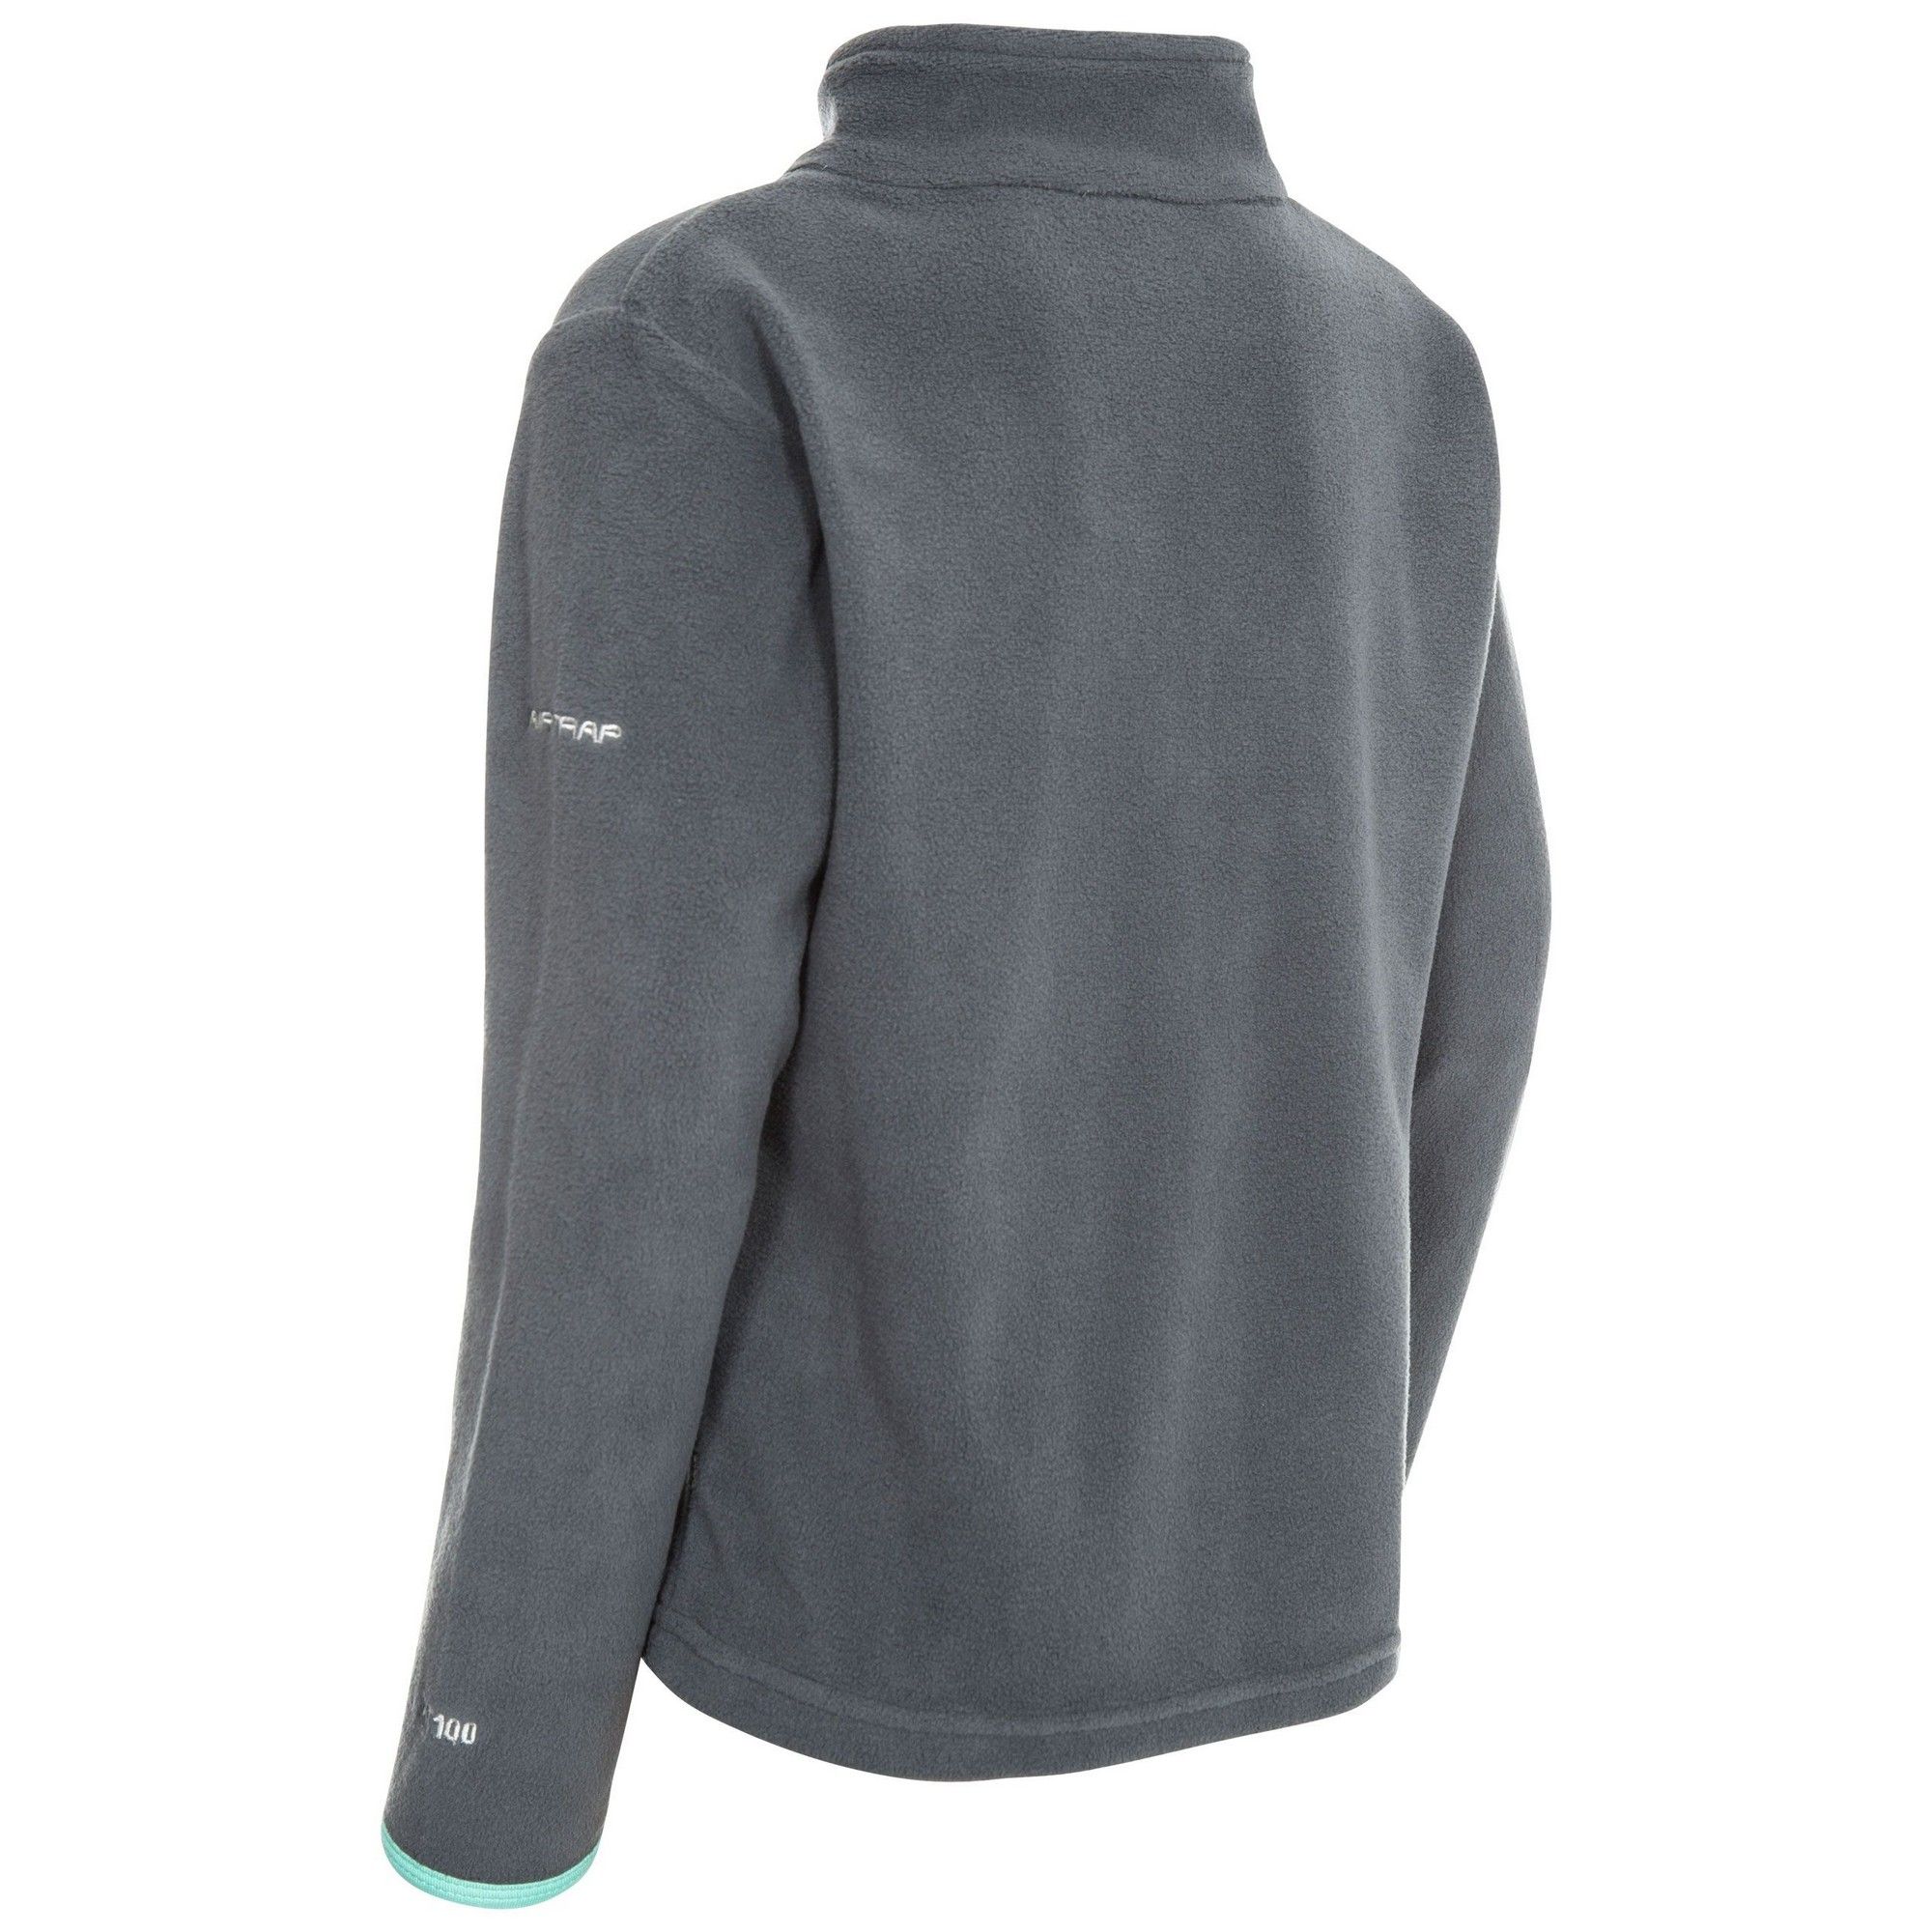 1/2 zip in contrast colour. Contrast binding on cuffs. Contrast facing on inner collar. Material: 100% polyester microfleece. Trespass Childrens Chest Sizing (approx): 2/3 Years - 21in/53cm, 3/4 Years - 22in/56cm, 5/6 Years - 24in/61cm, 7/8 Years - 26in/66cm, 9/10 Years - 28in/71cm, 11/12 Years - 31in/79cm.